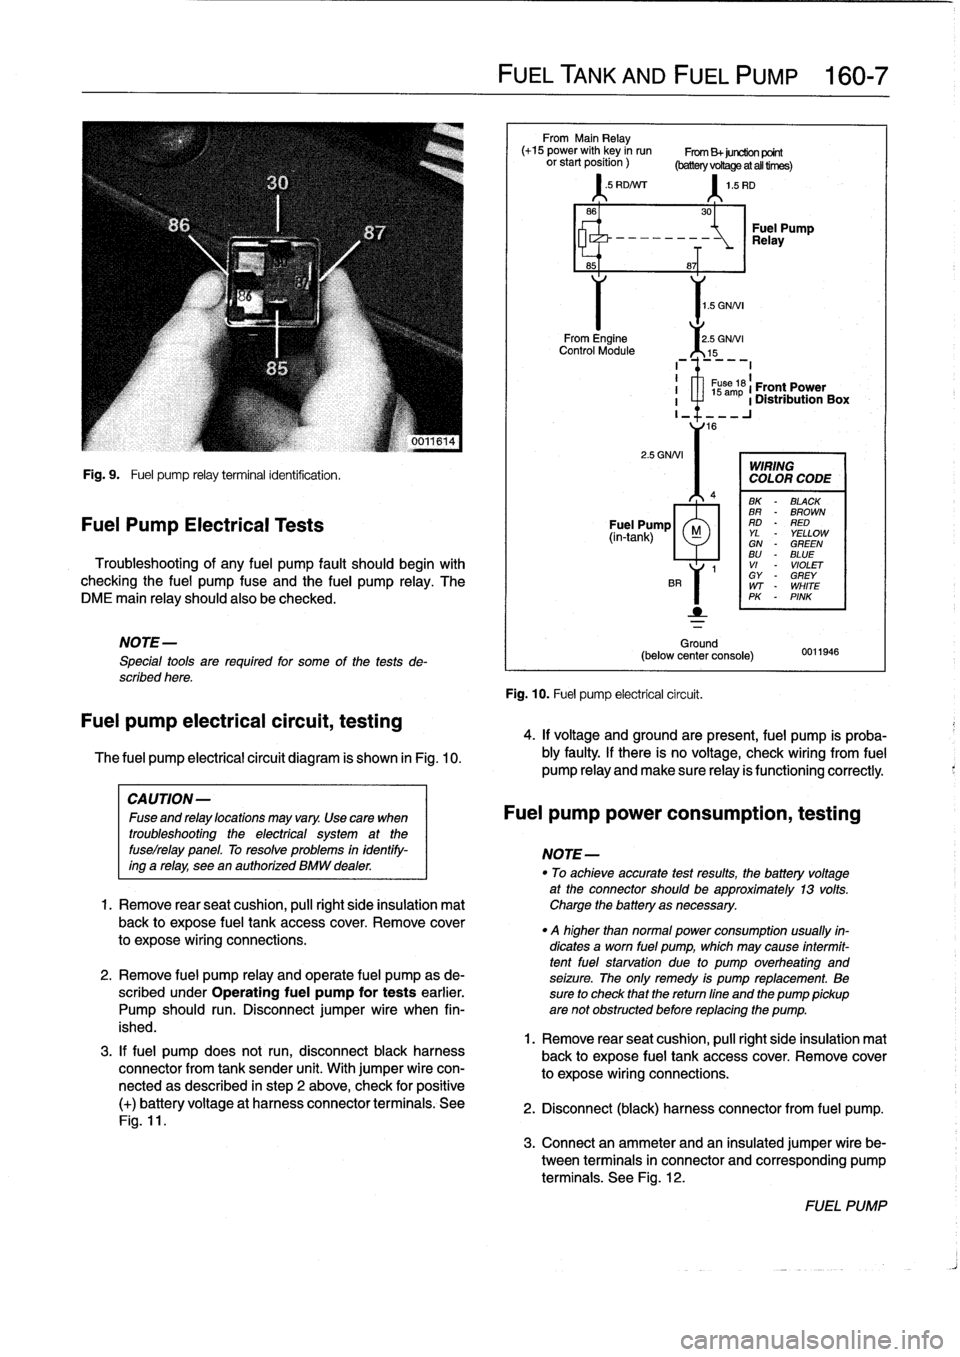 BMW 323i 1995 E36 Workshop Manual 
Fig
.
9
.

	

Fuel
pump
relay
terminal
identification
.

Fuel
Pump
Electrical
Tests

Troubleshooting
of
any
fuel
pump
fault
should
begin
with

checking
the
fuel
pump
fuse
and
the
fuel
pump
relay
.
Th